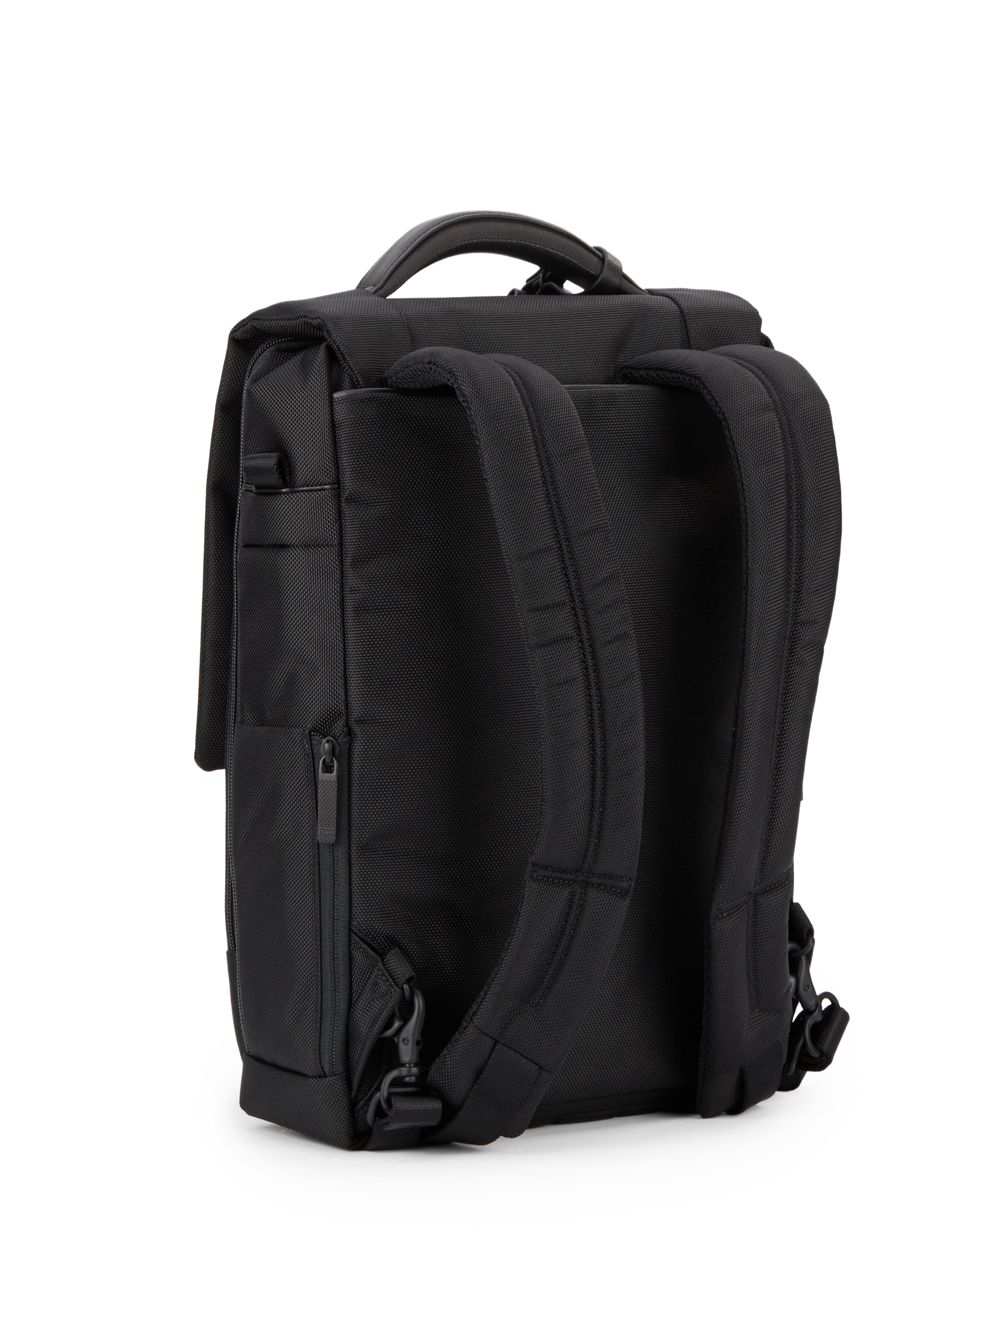 Lyst - T-Tech By Tumi Convertible Nylon Backpack in Black for Men